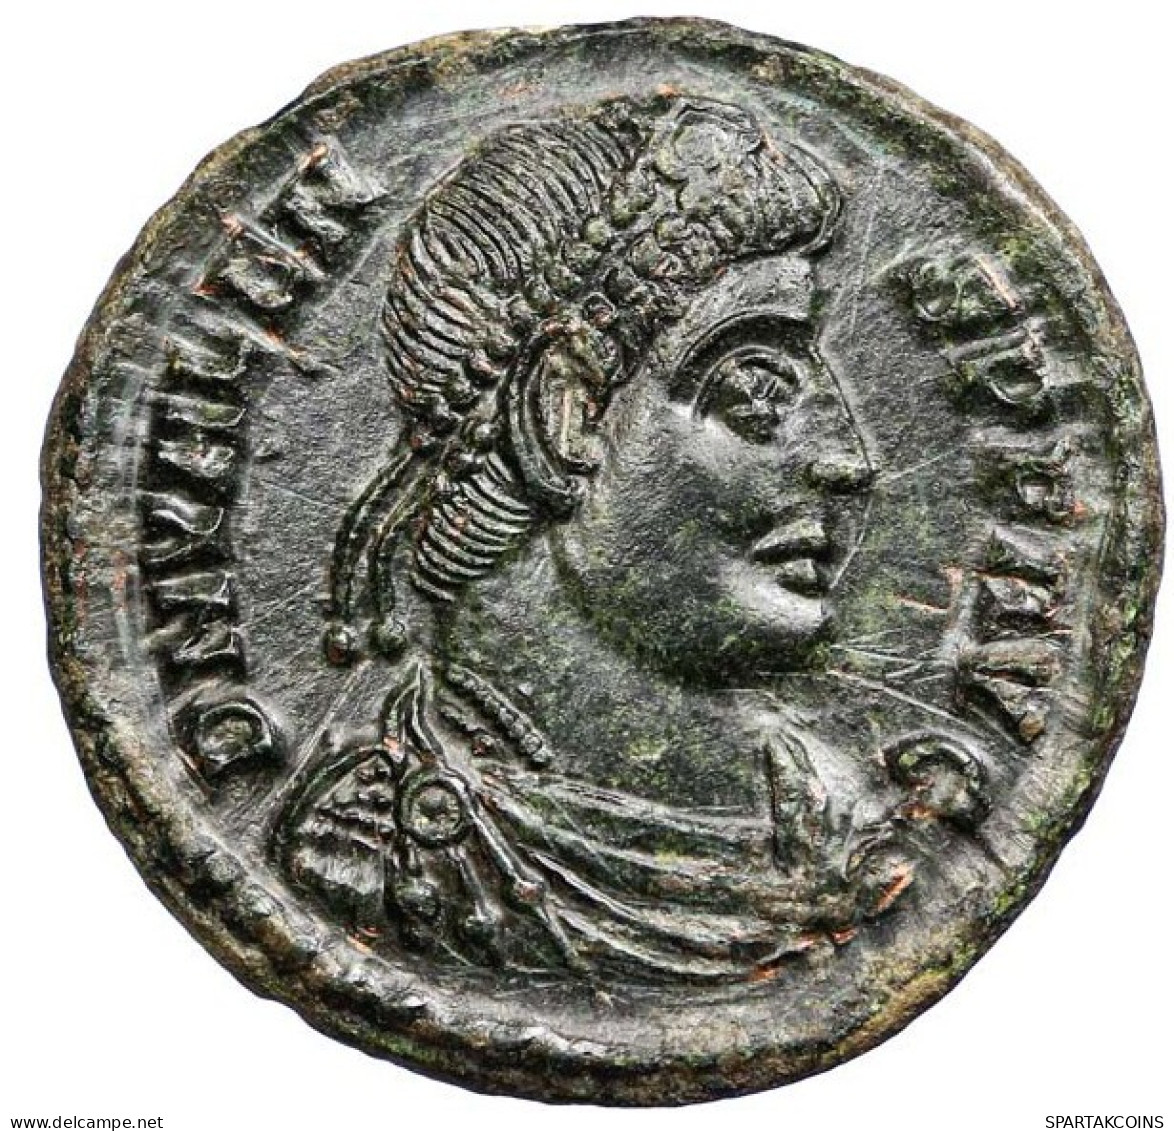 VALENS Mint Siscia Officine: 1re AD364 Rarity: R1 2.66g/19mm #ANC10019.81.U.A - The End Of Empire (363 AD To 476 AD)